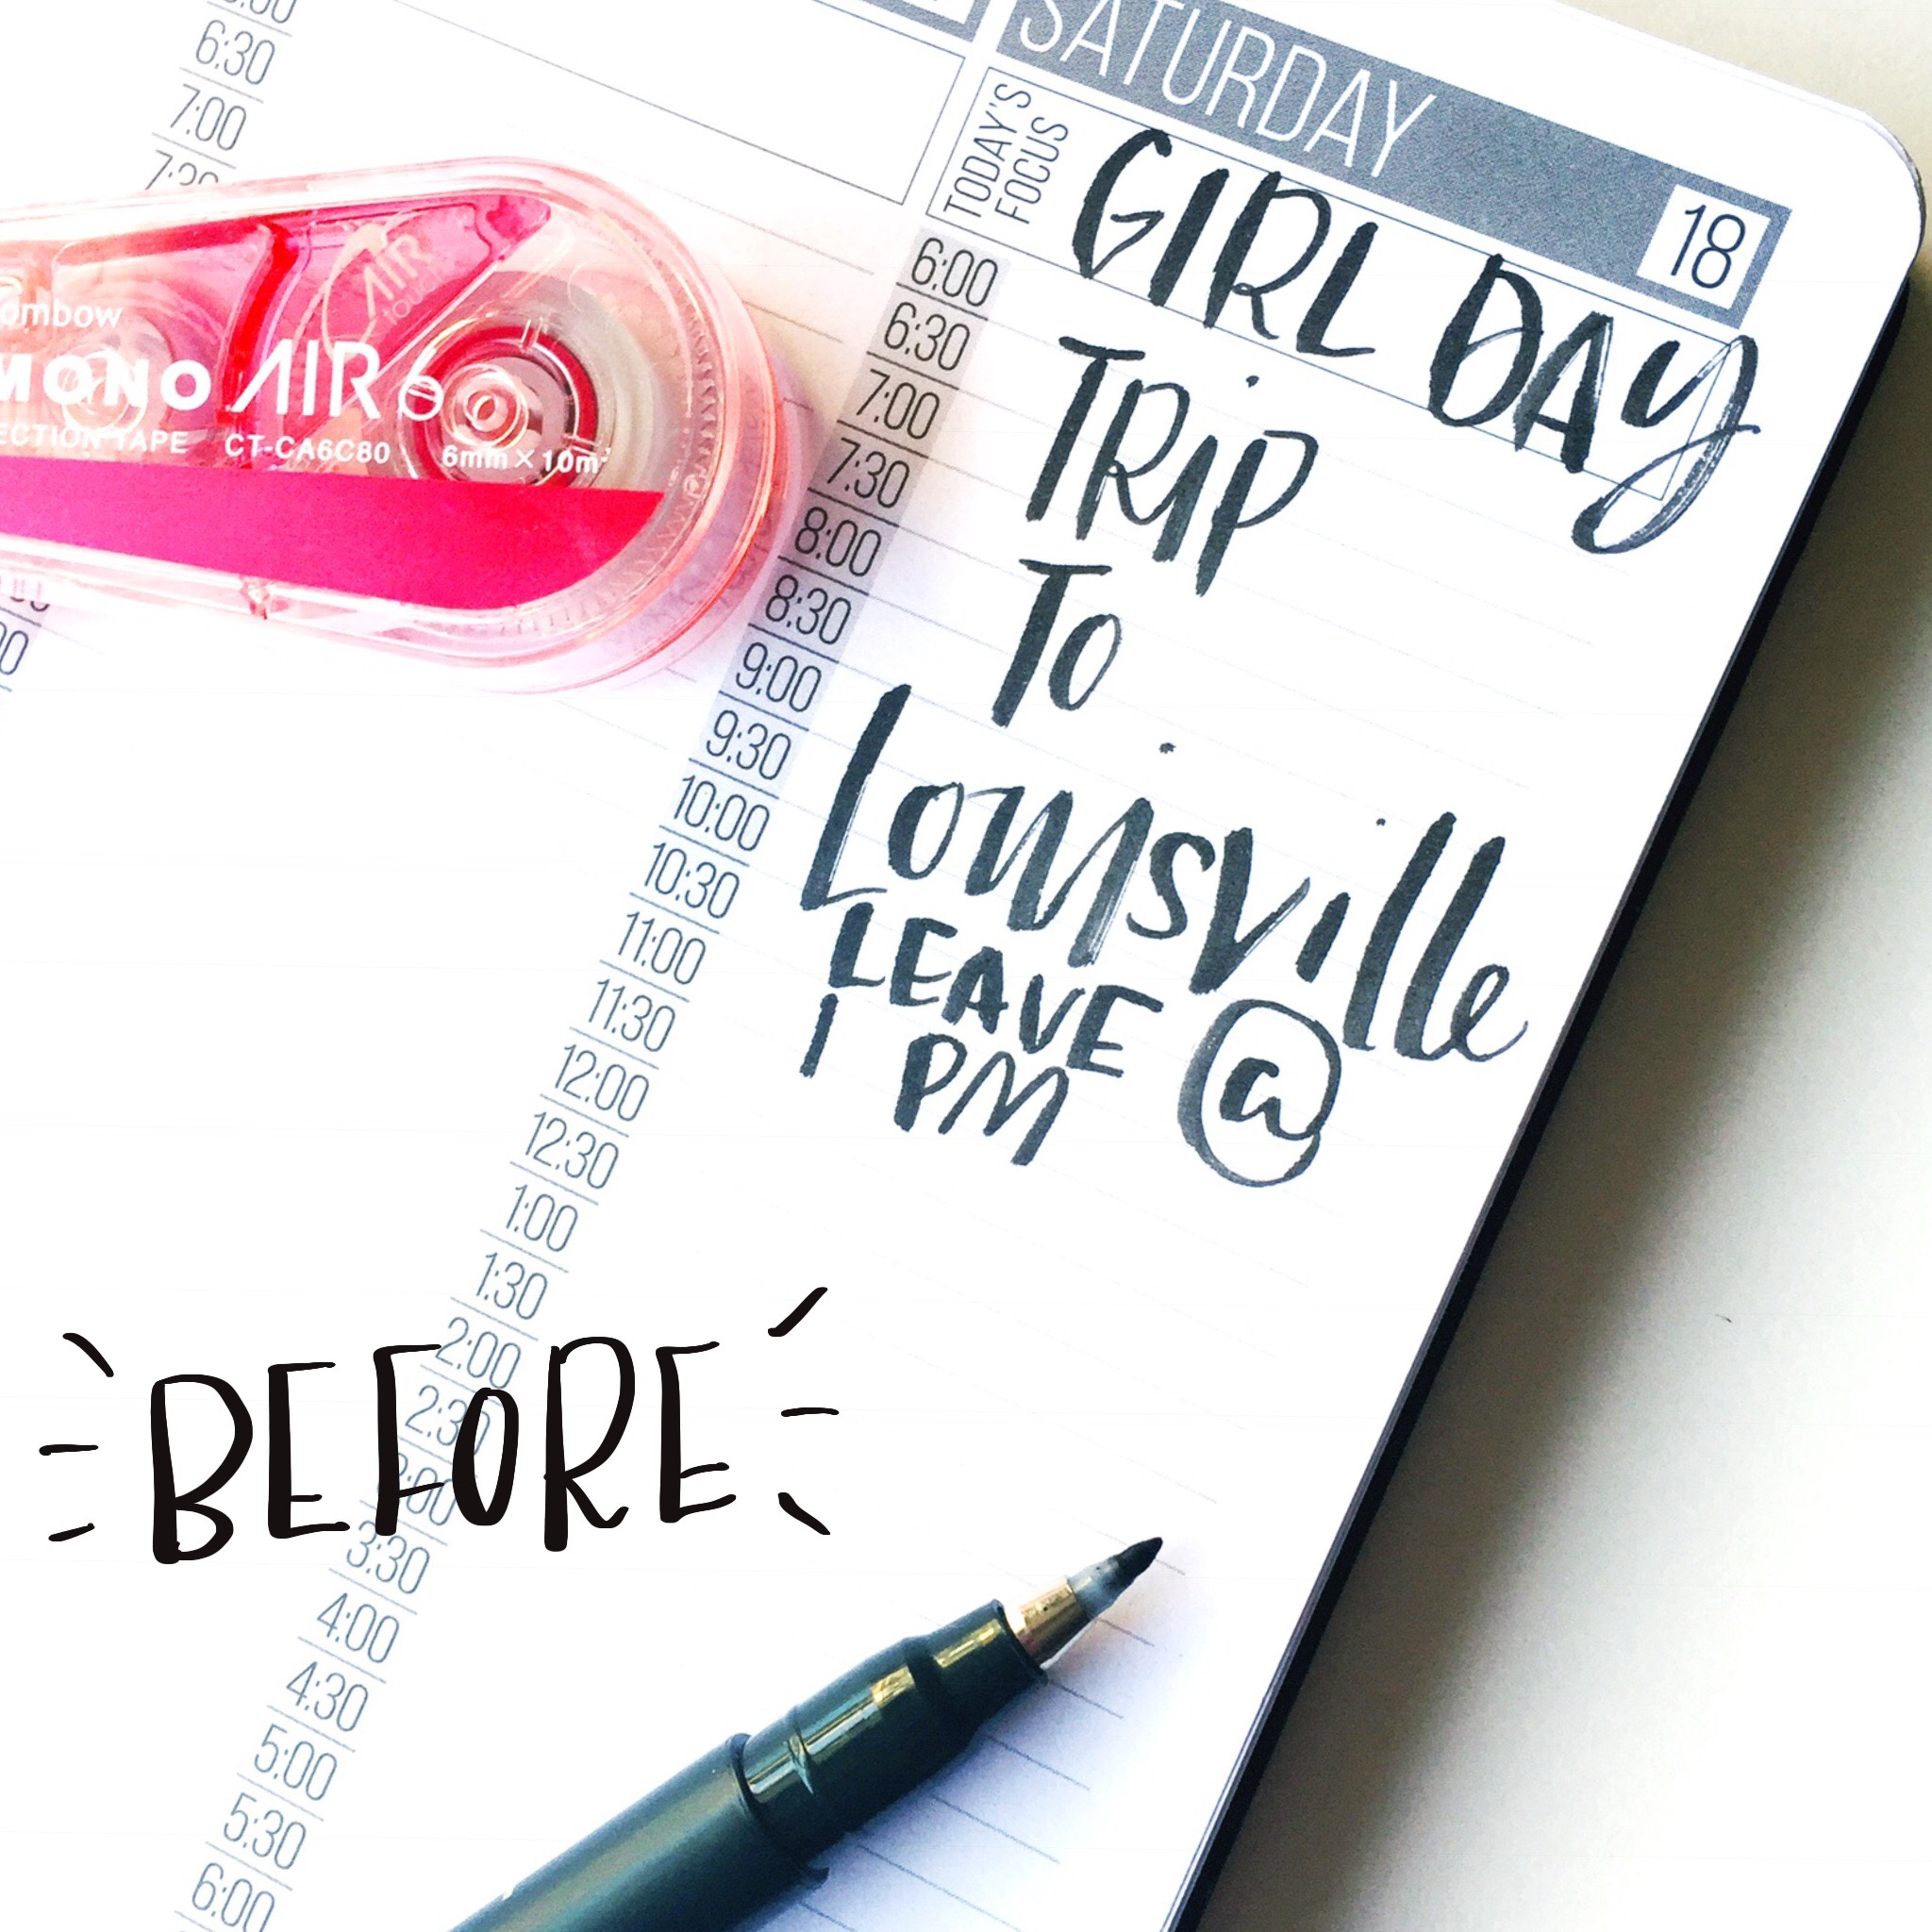 Use Tombow Mono Air Correction Tape to correct and create things for organization and day to day living!